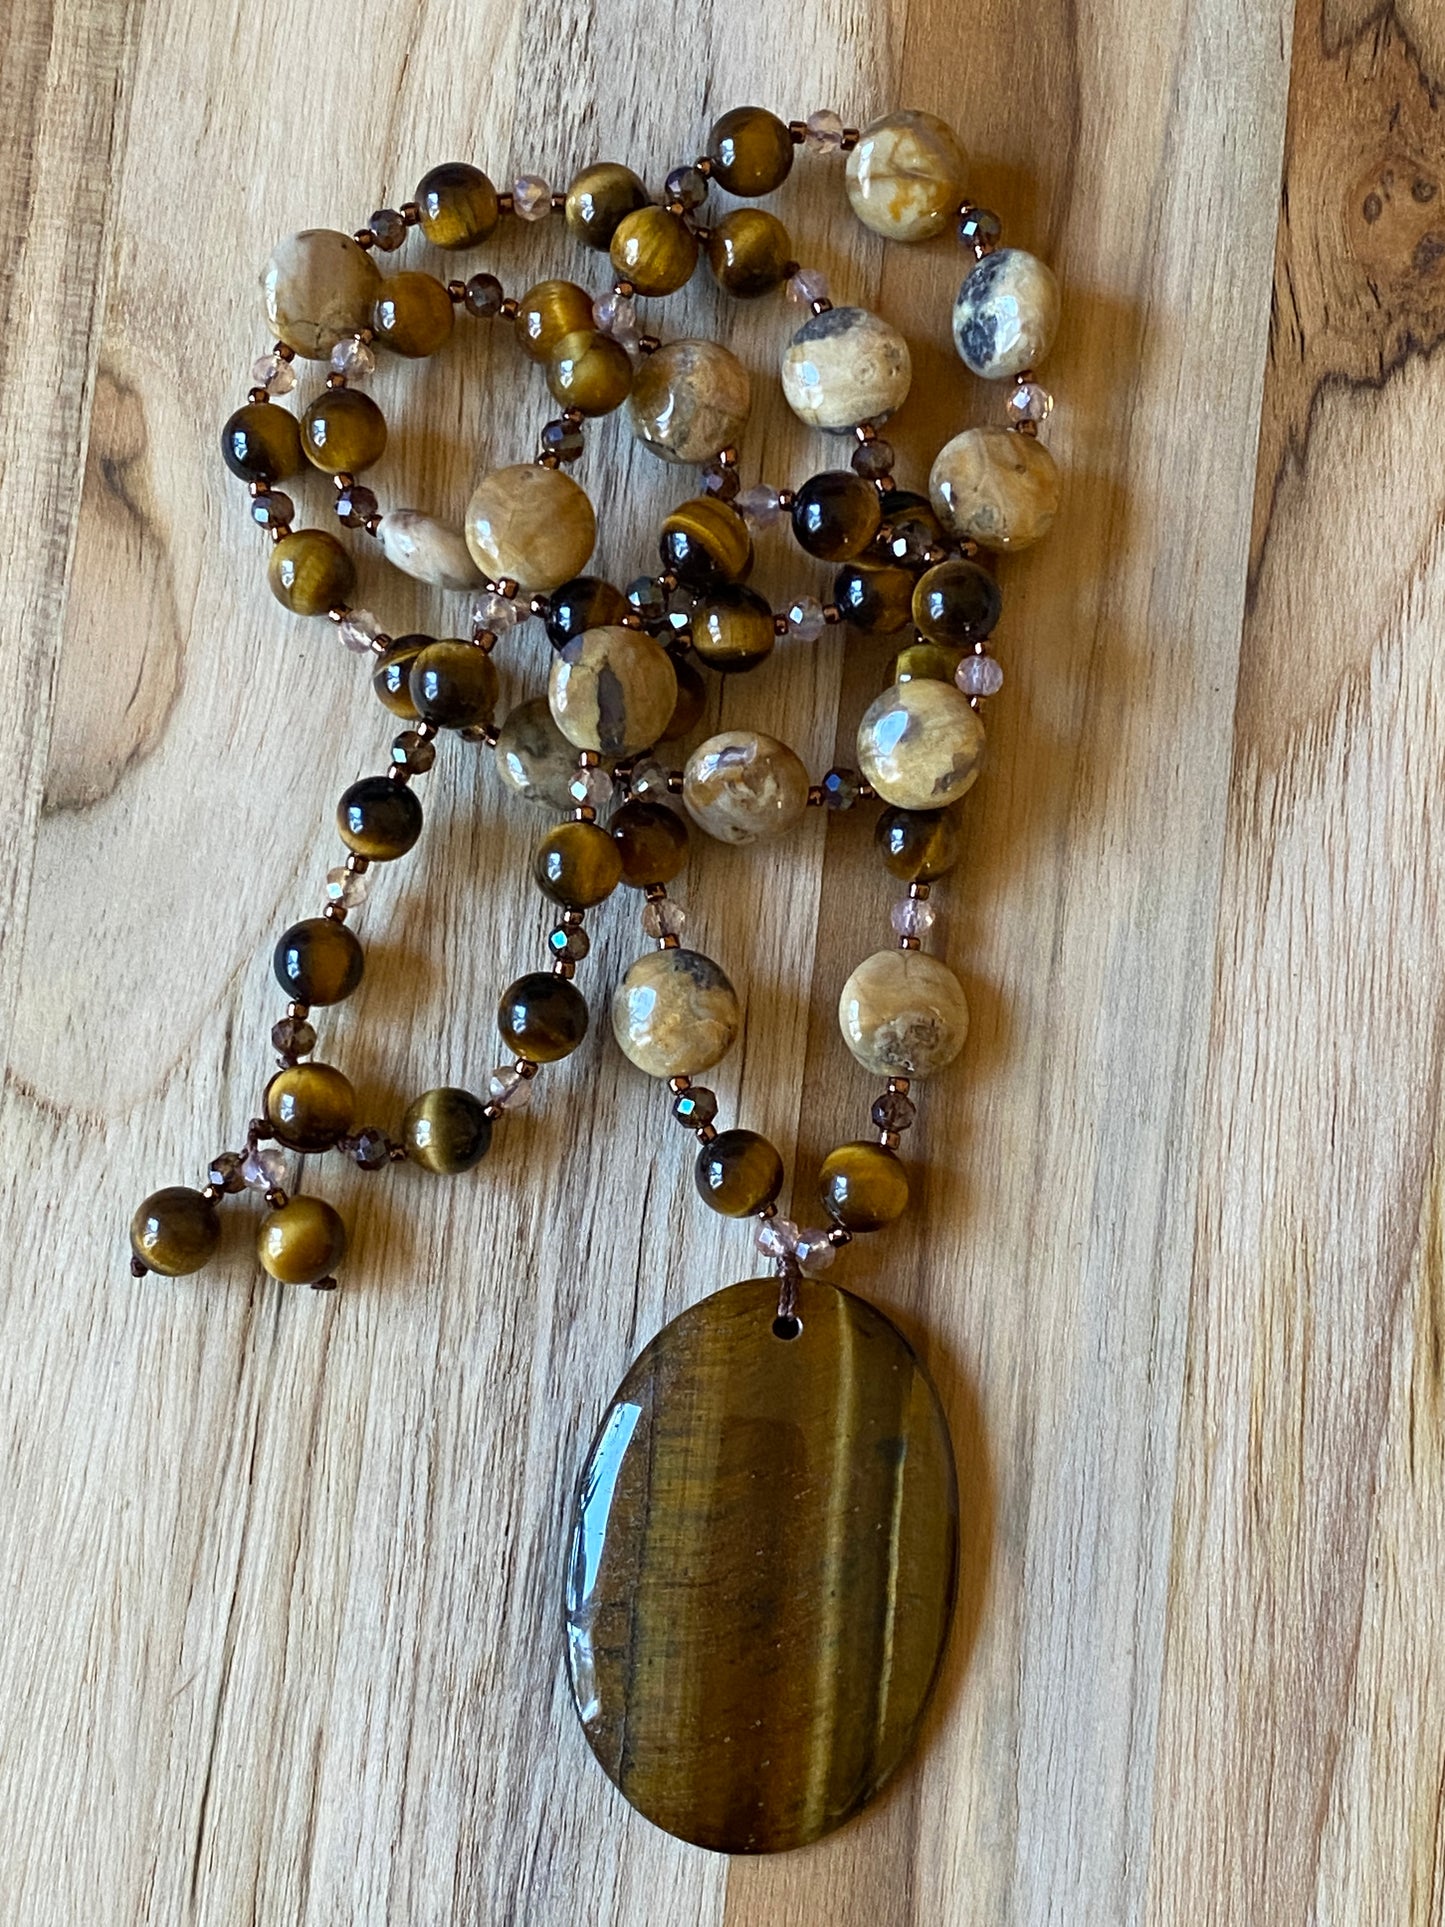 Long Tiger Eye Pendant Necklace with Agate and Crystal Beads